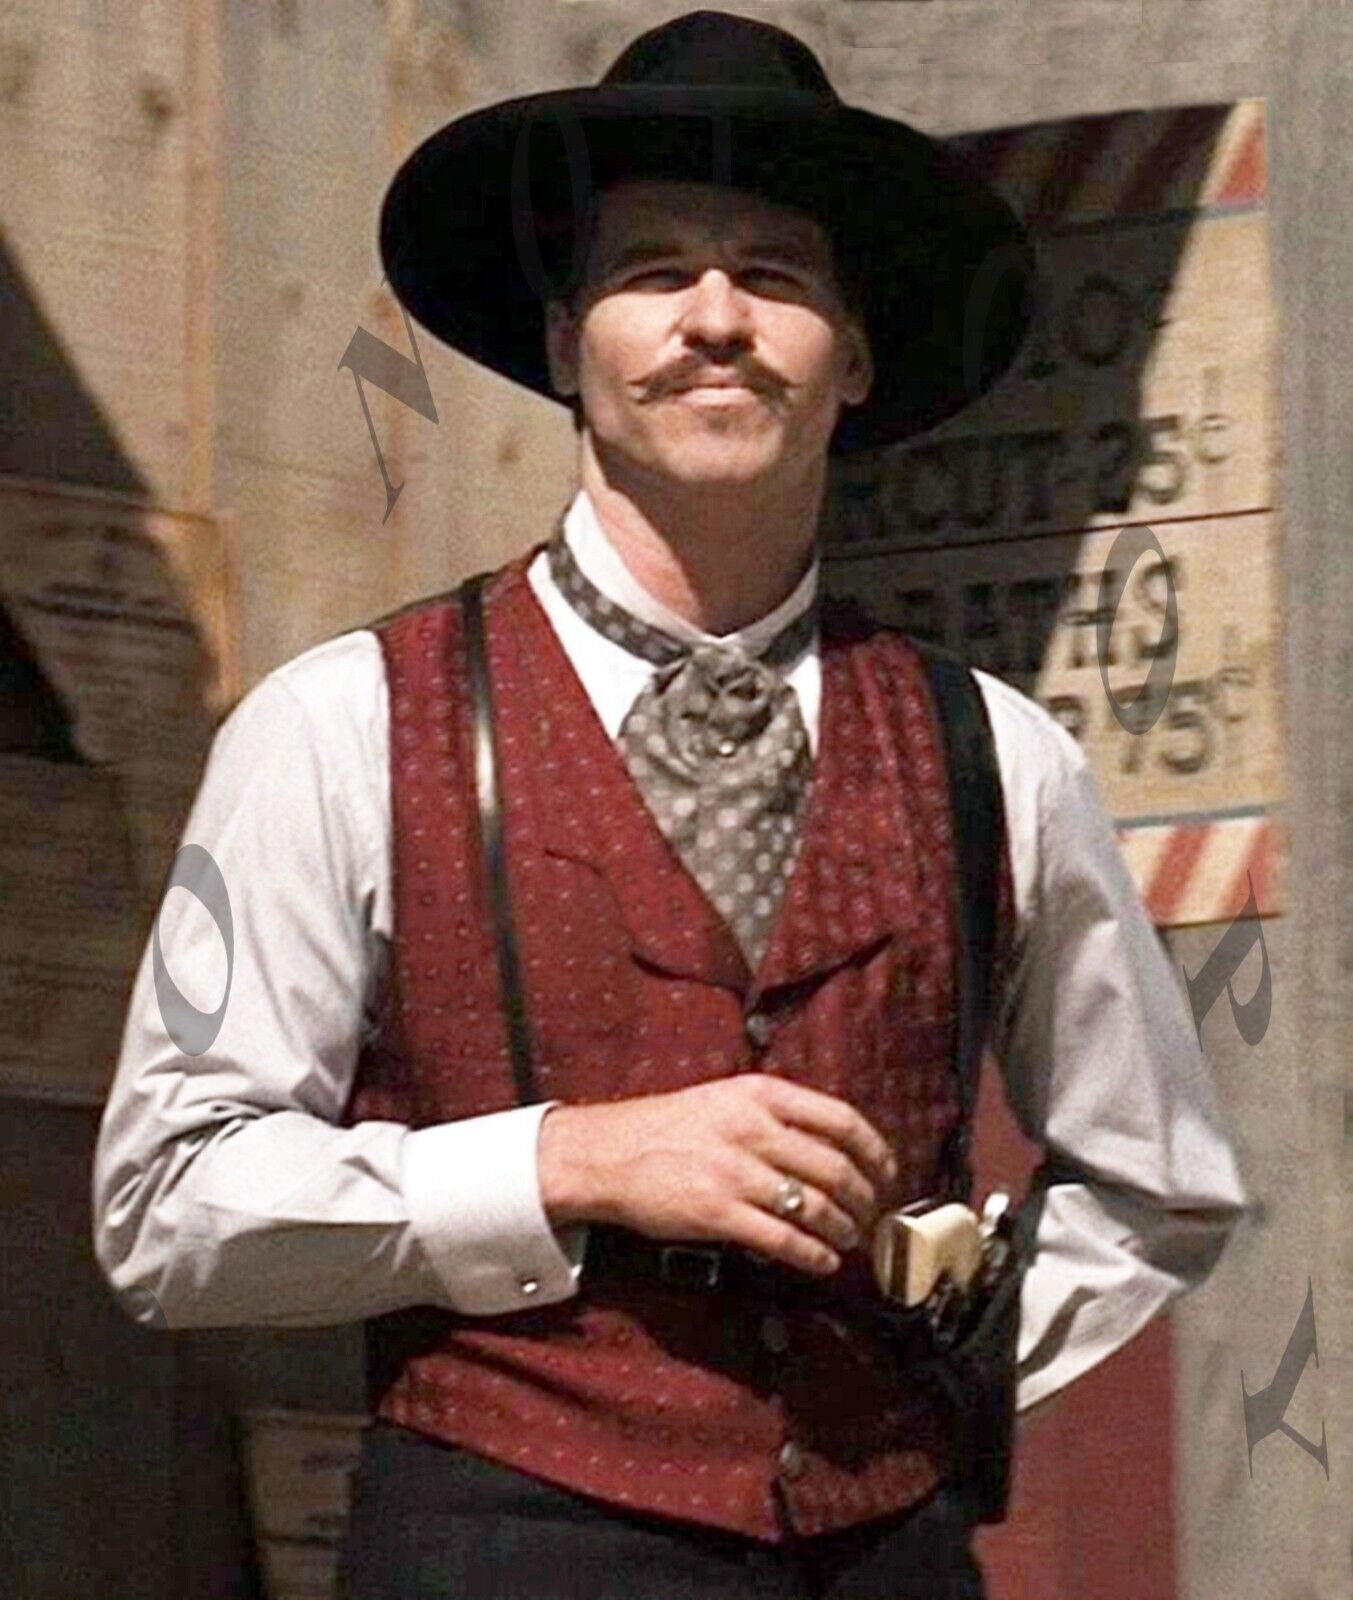 ANTIQUE REPRODUCTION 8X10 PHOTO MOVIE TOMBSTONE VAL KILMER AS DOC HOLIDAY # 4